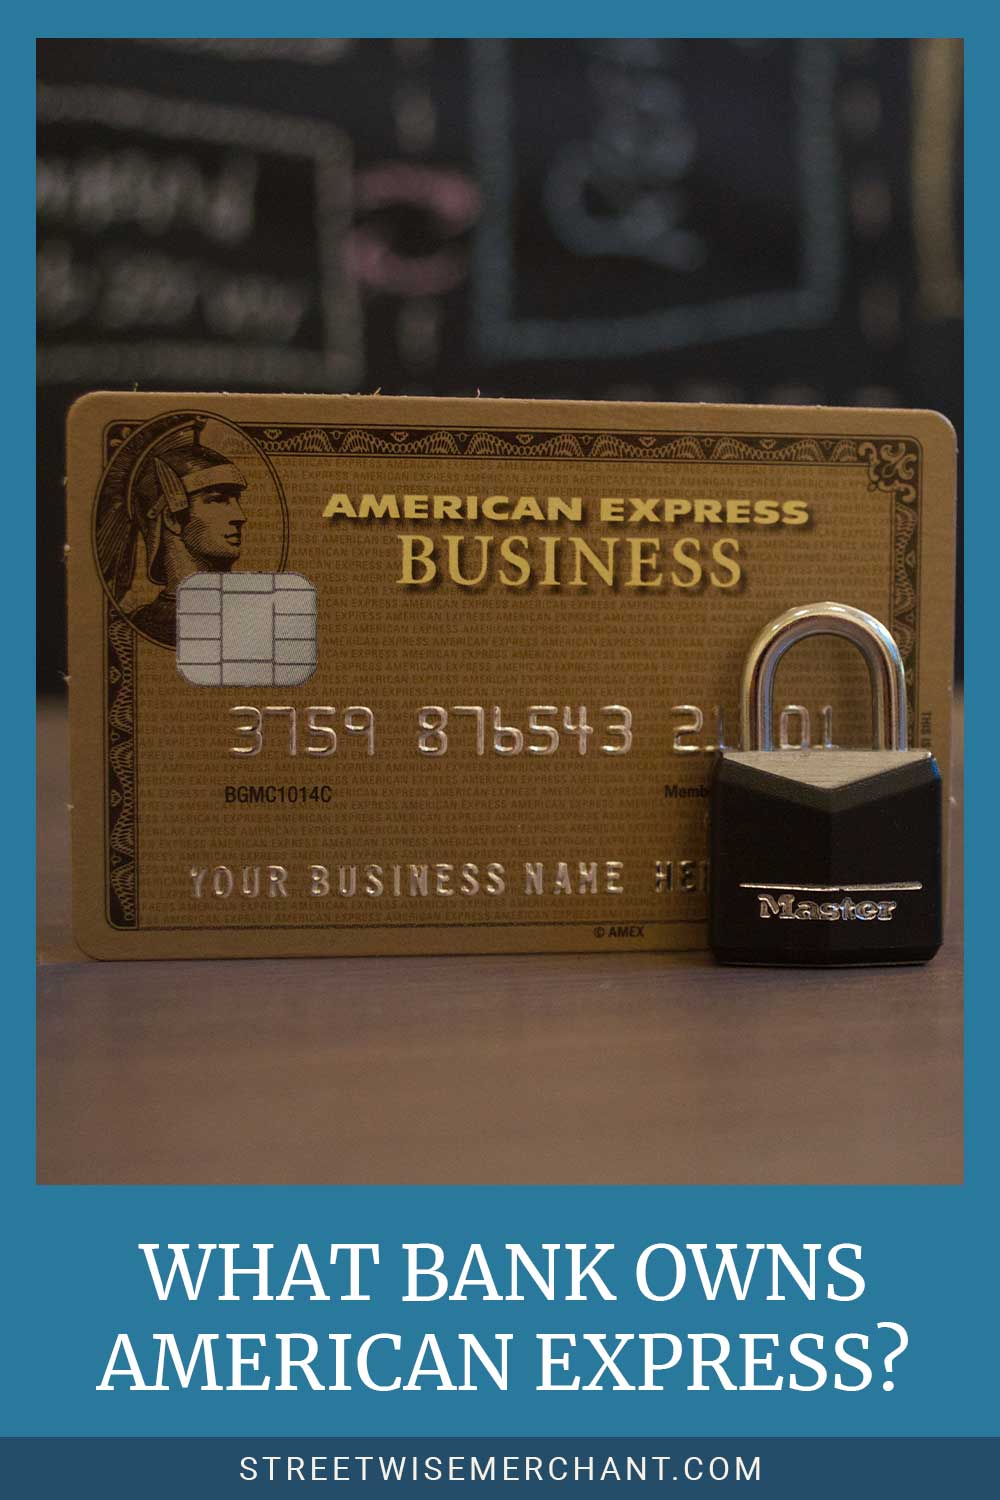 What Bank Owns American Express?